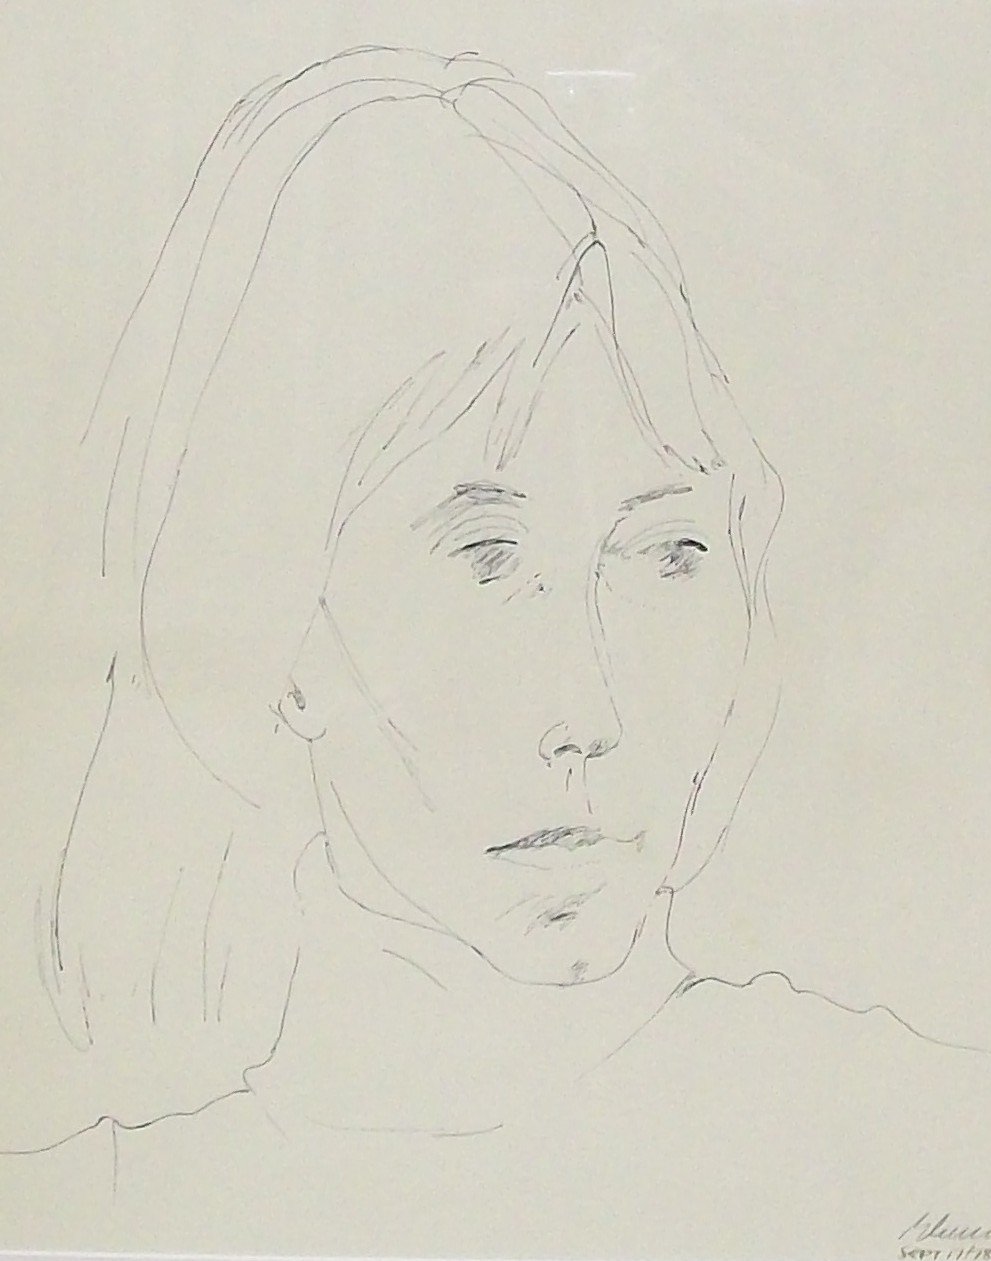 Greg Curnoe, Shelia, lithography on paper, September 1978, 30x24"